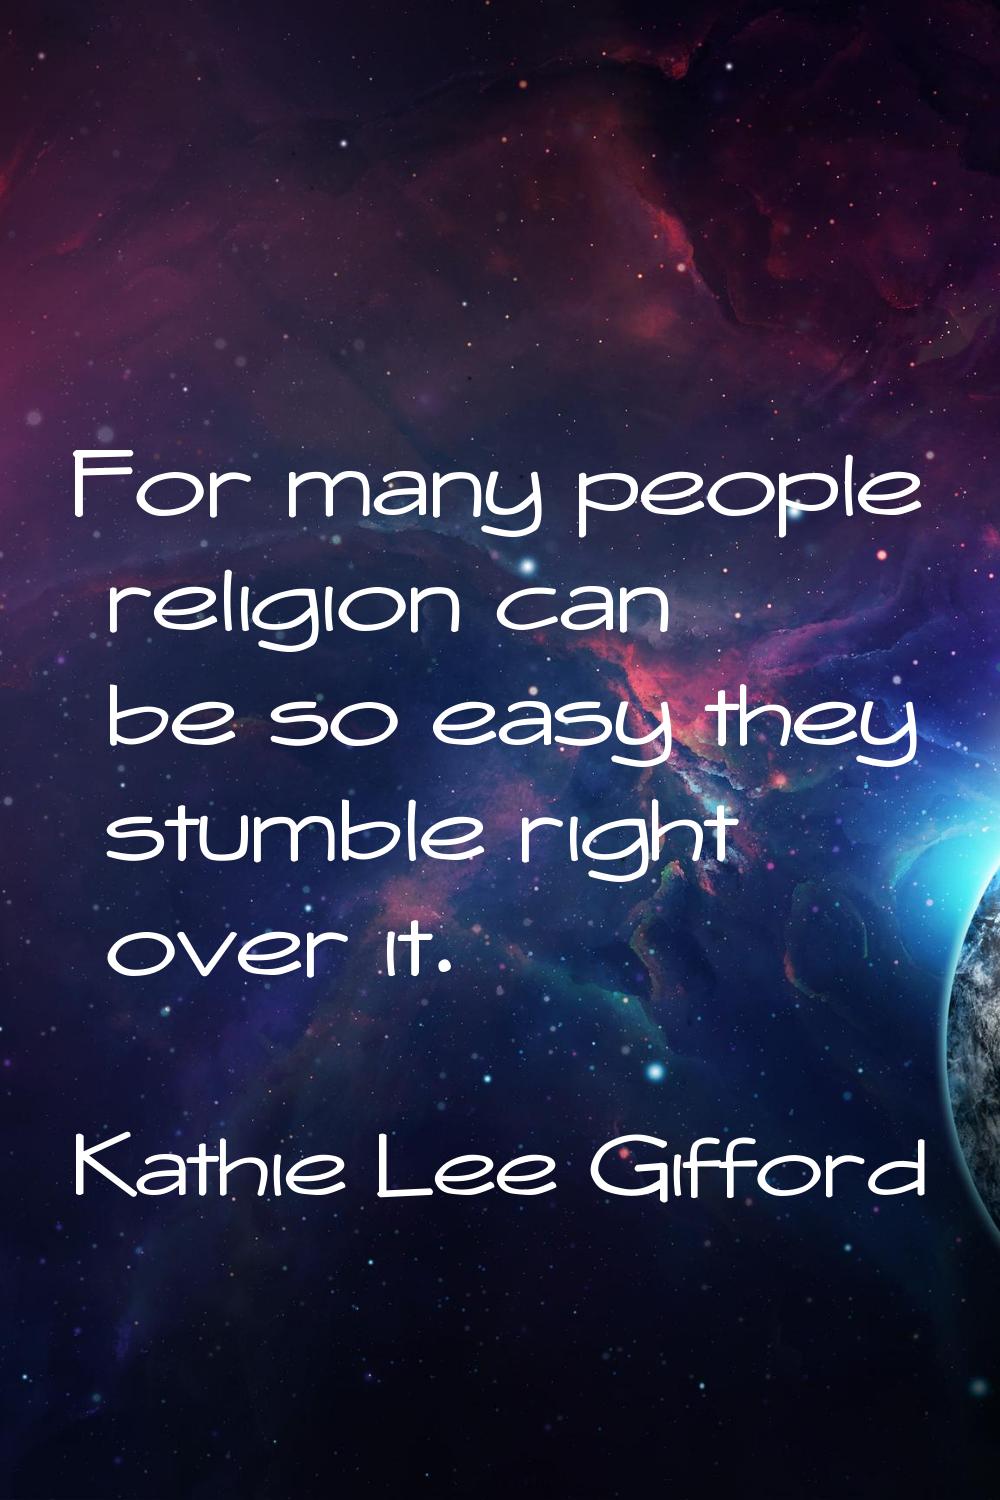 For many people religion can be so easy they stumble right over it.